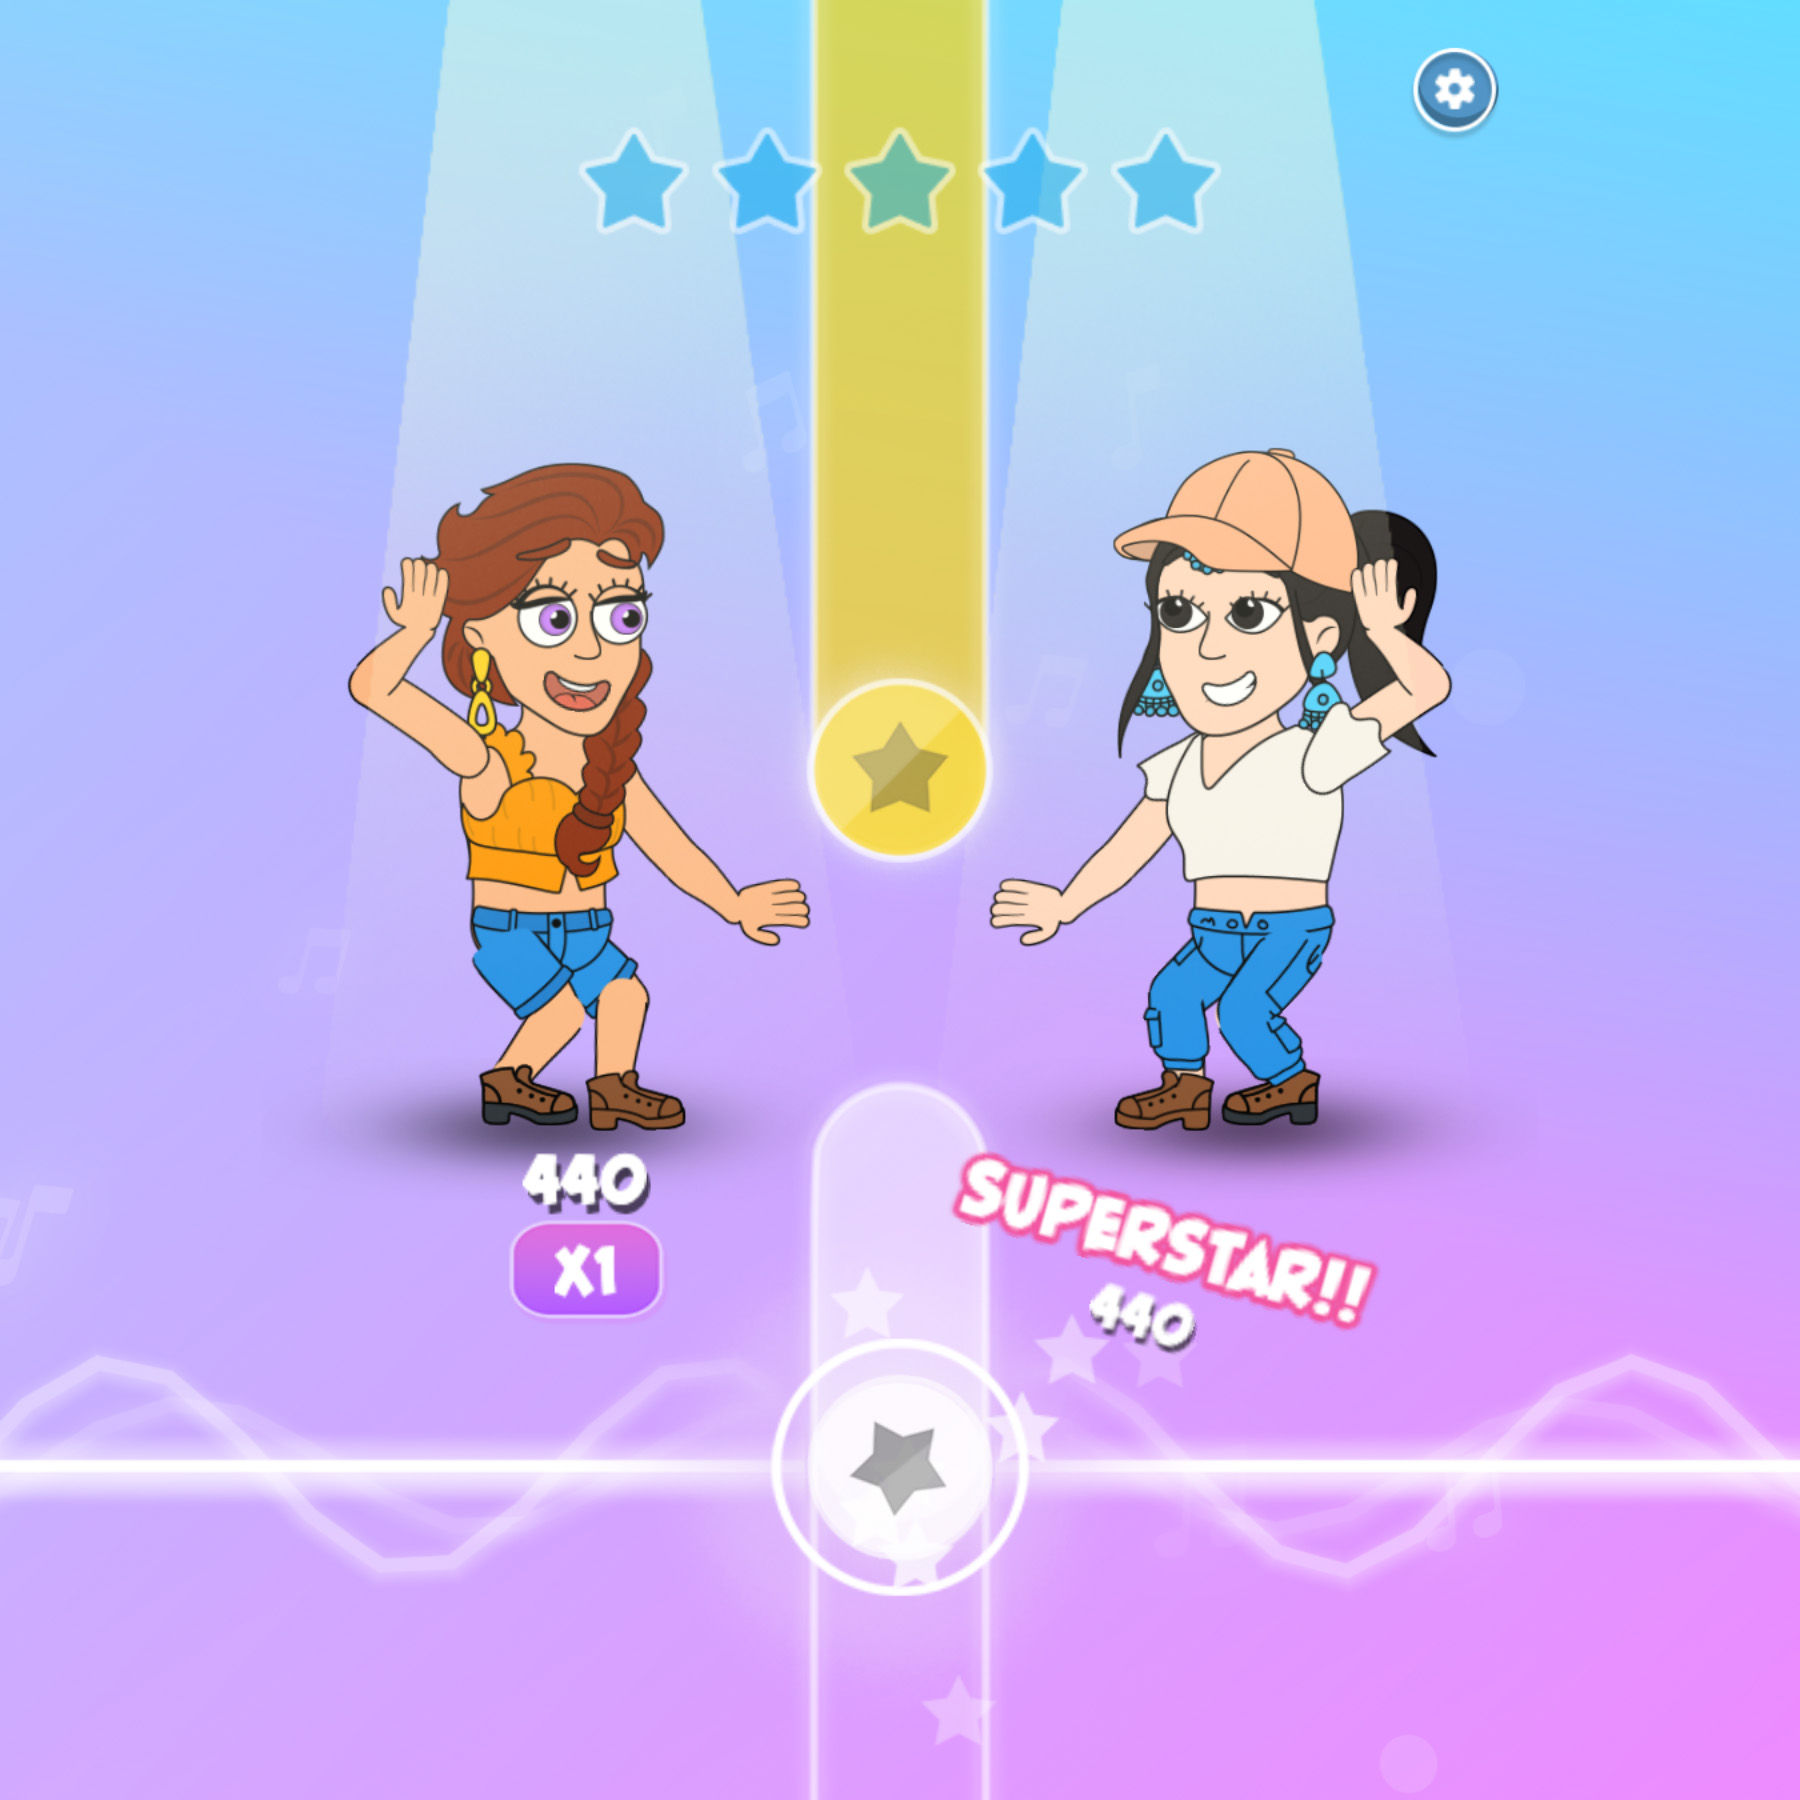 Dancing Line - Play Online on SilverGames 🕹️